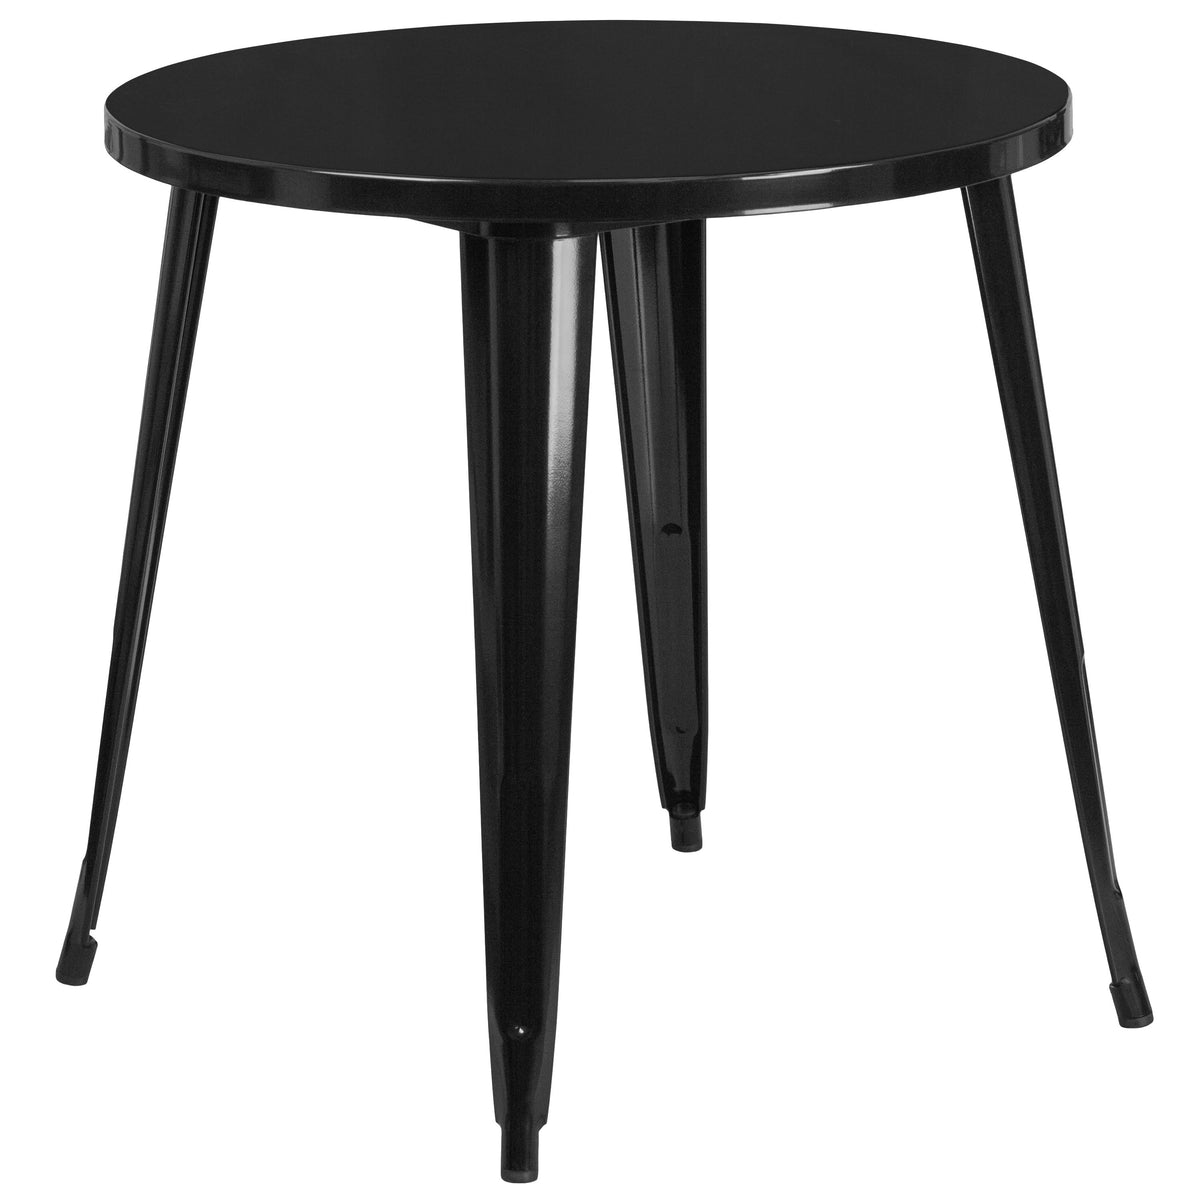 Black |#| 30inch Round Black Metal Indoor-Outdoor Table Set with 4 Arm Chairs